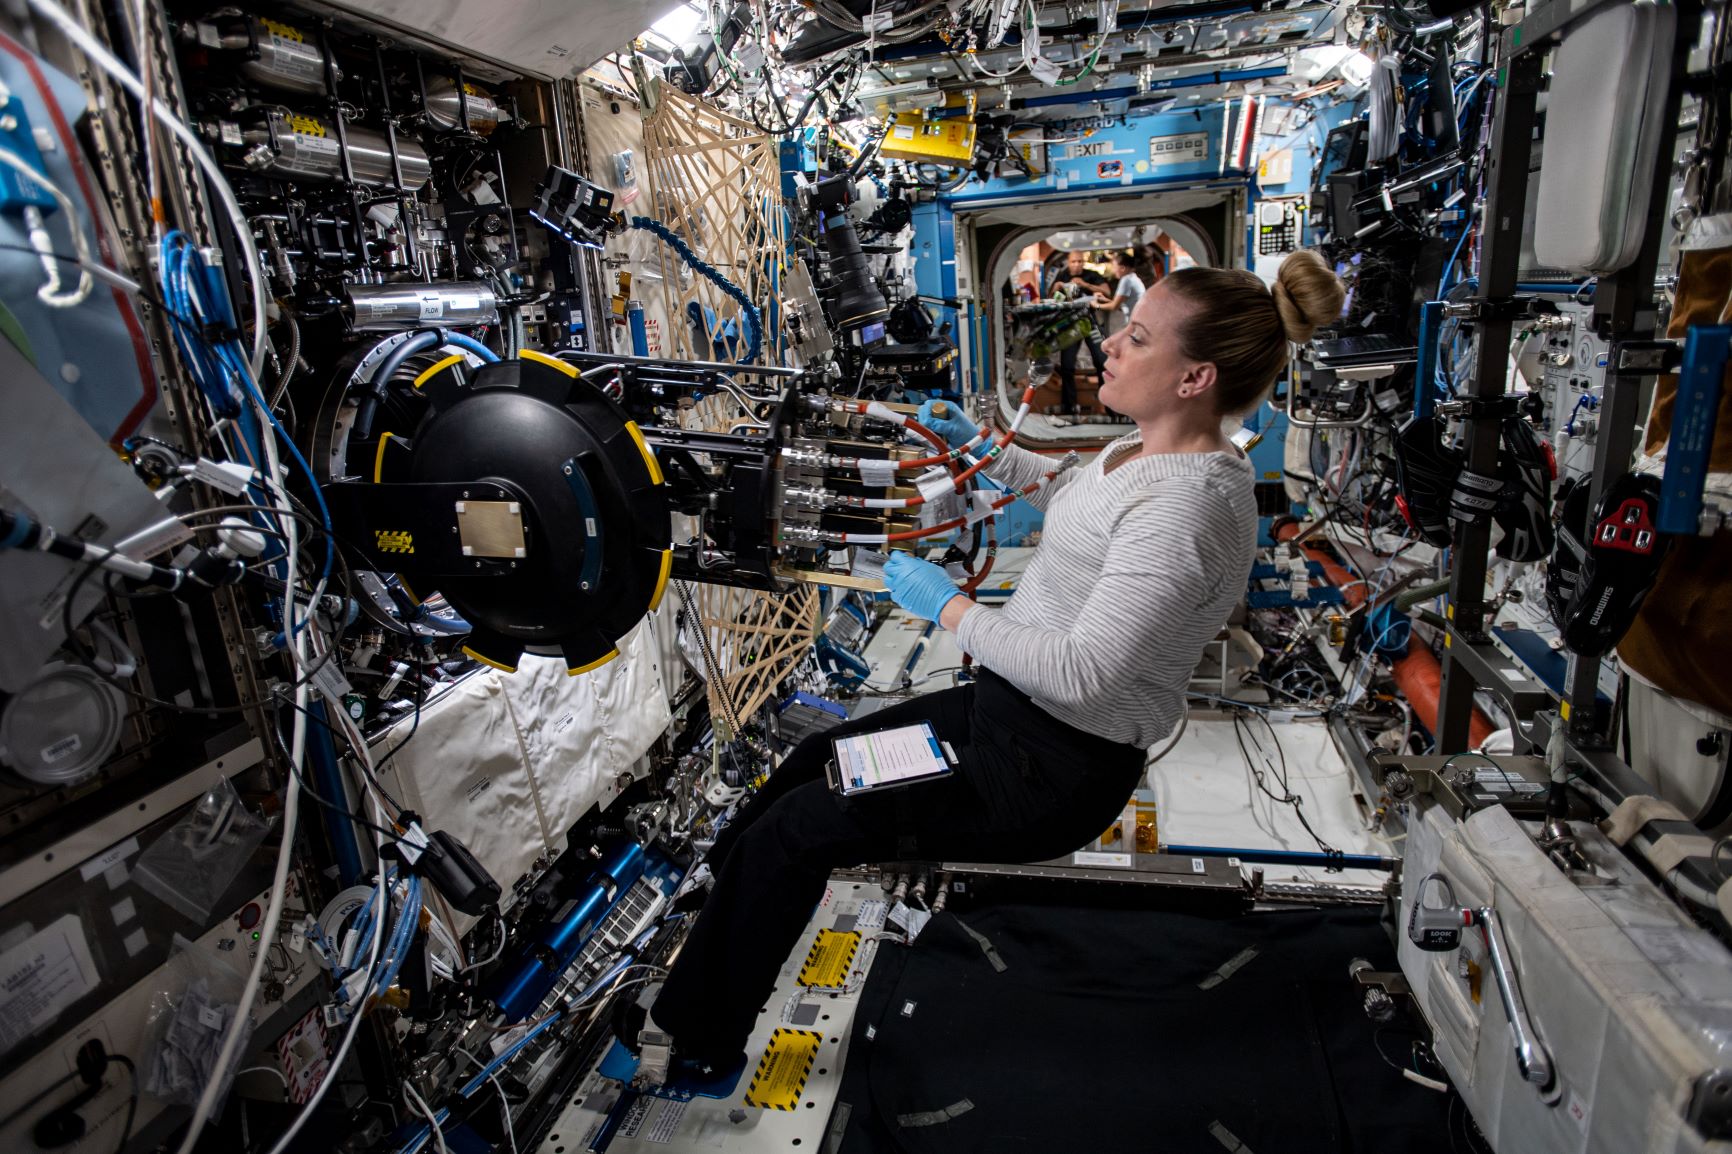 NASA astronaut Kate Rubins adjusts research hardware aboard the International Space Station. Her feet are strapped to the floor to give her leverage as she works in the station's low gravity. The longer she stays in this low gravity, the more her bone density and muscle mass will change. 